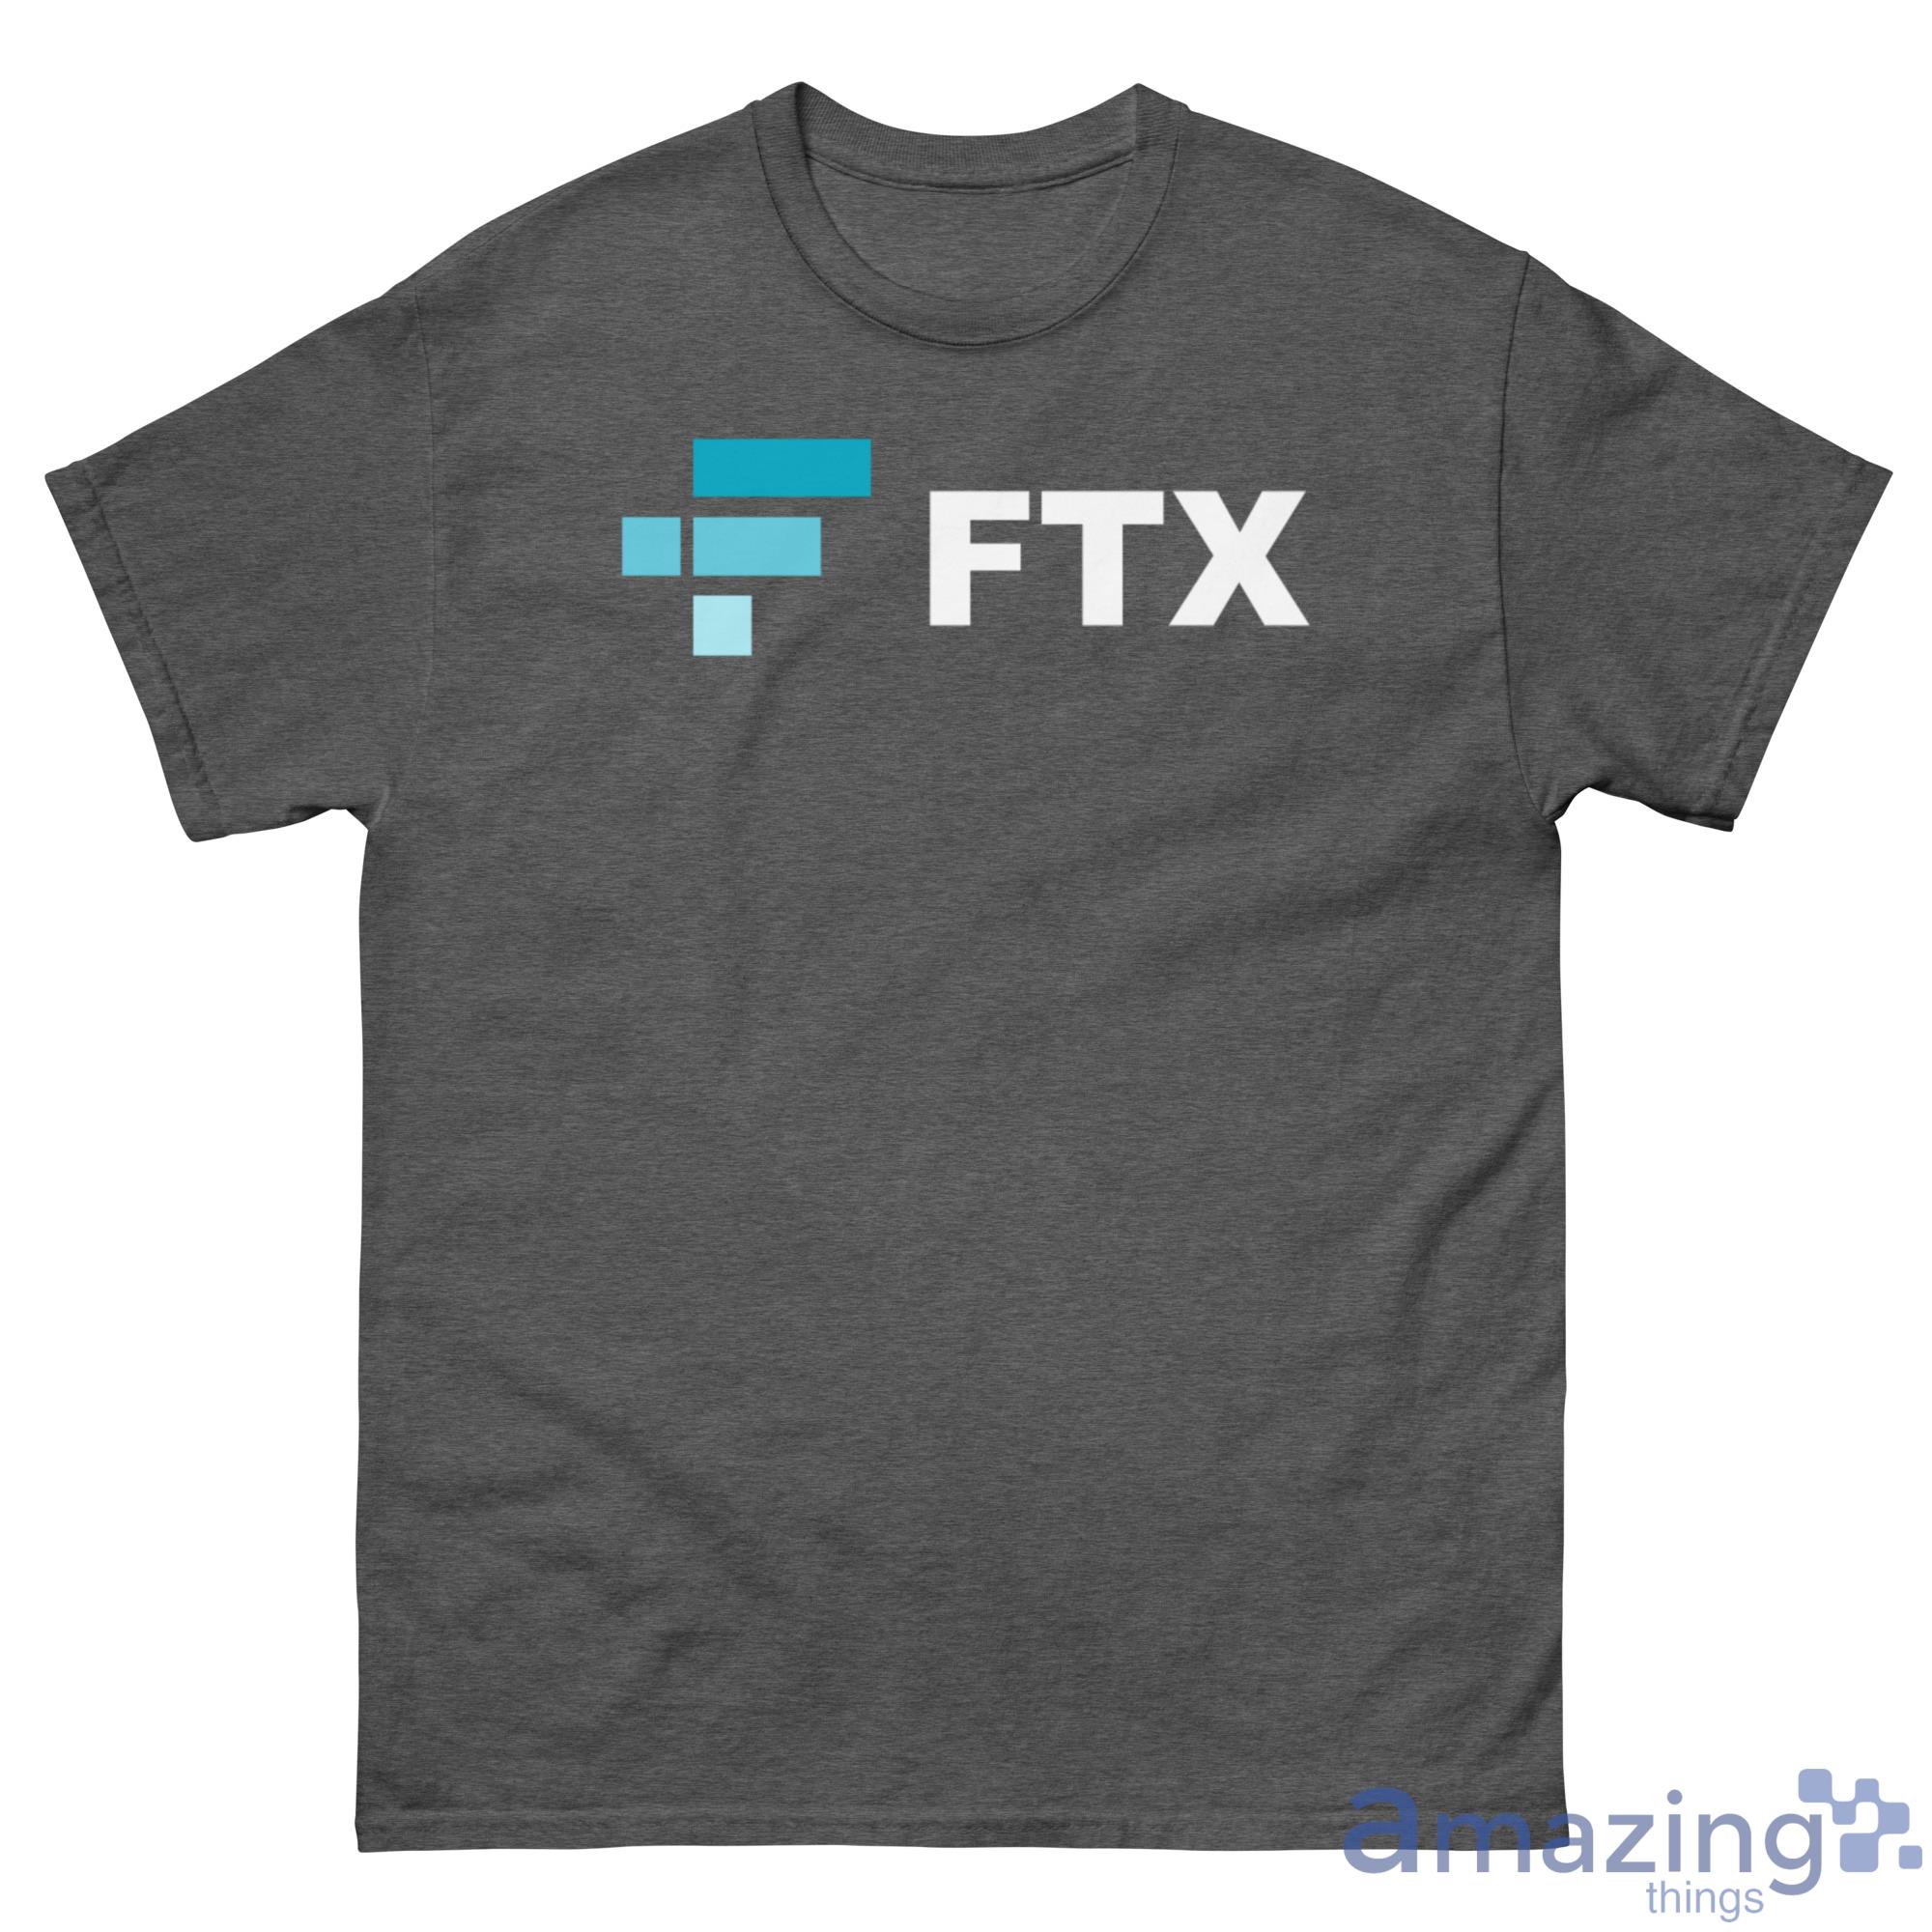 What Is Ftx On Umpire T-Shirt